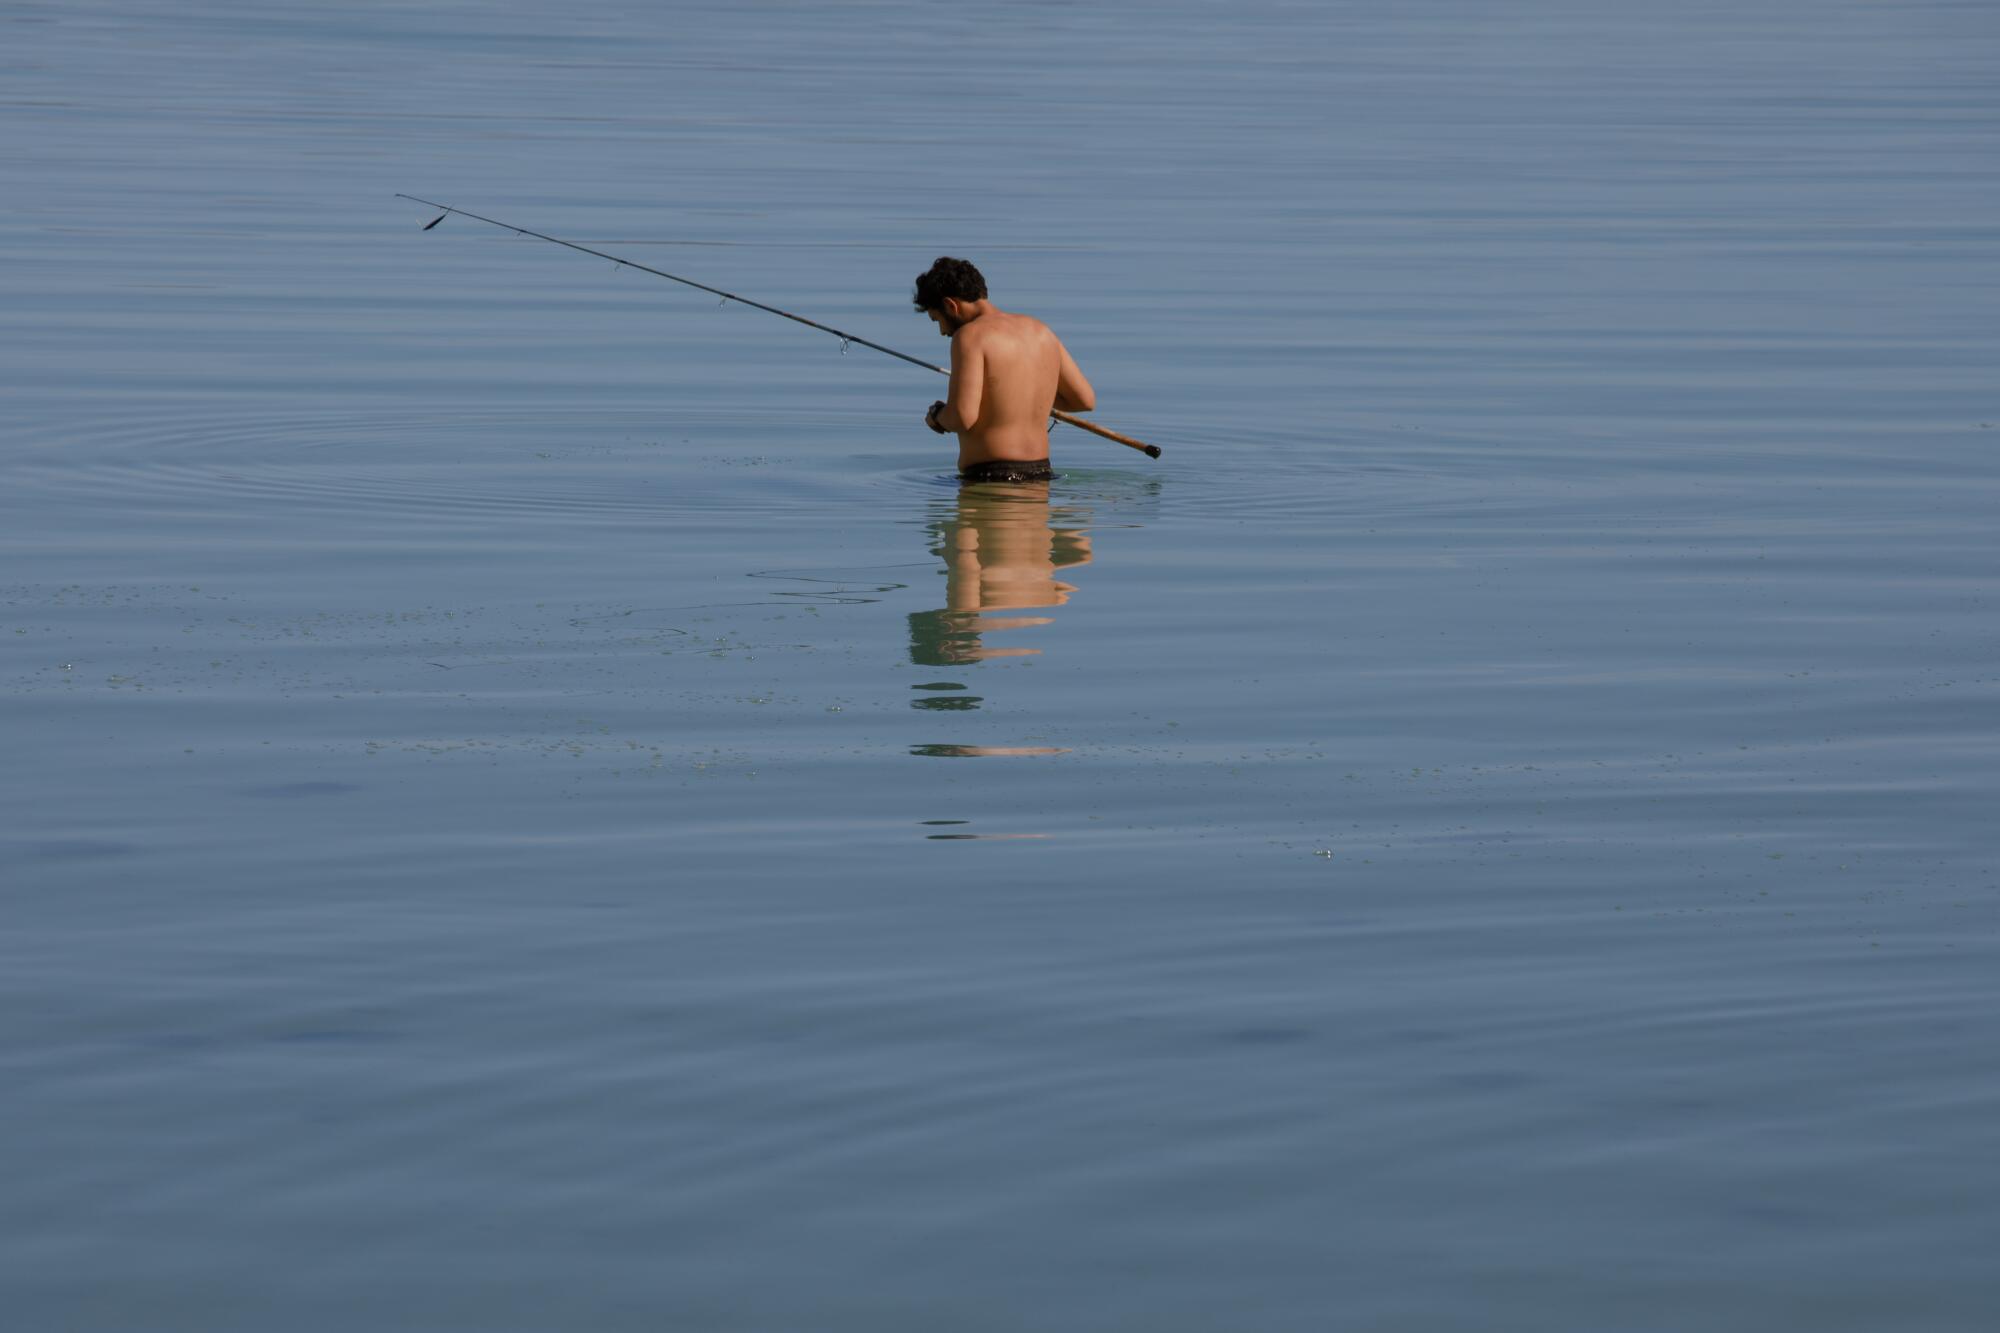 A shirtless man with a fishing rod, turned away from the camera, waist deep in and surrounded by blue water.